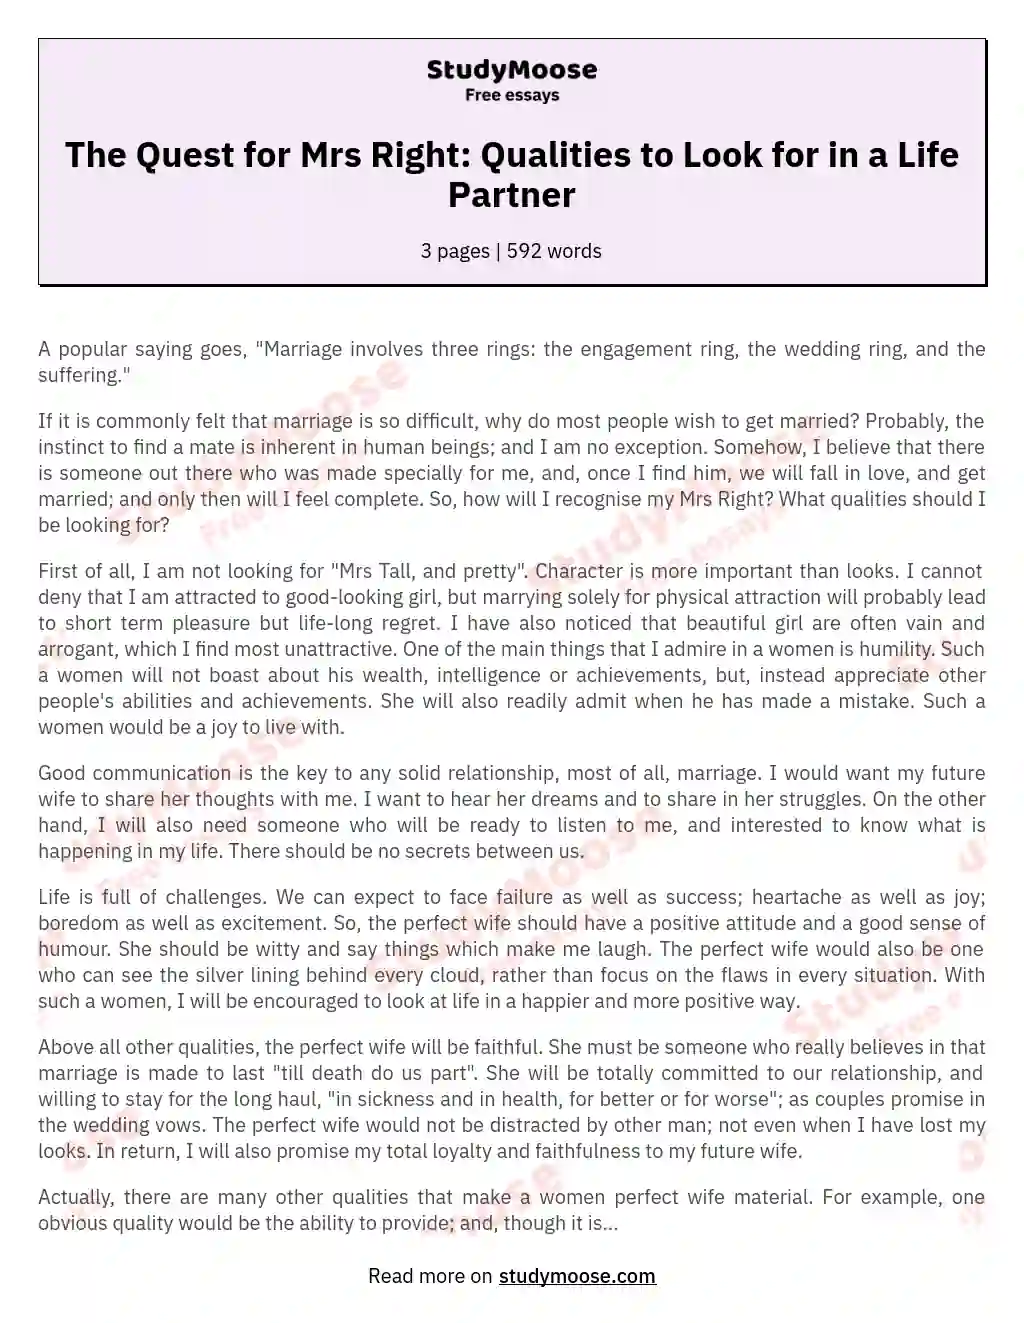 The Quest for Mrs Right: Qualities to Look for in a Life Partner essay